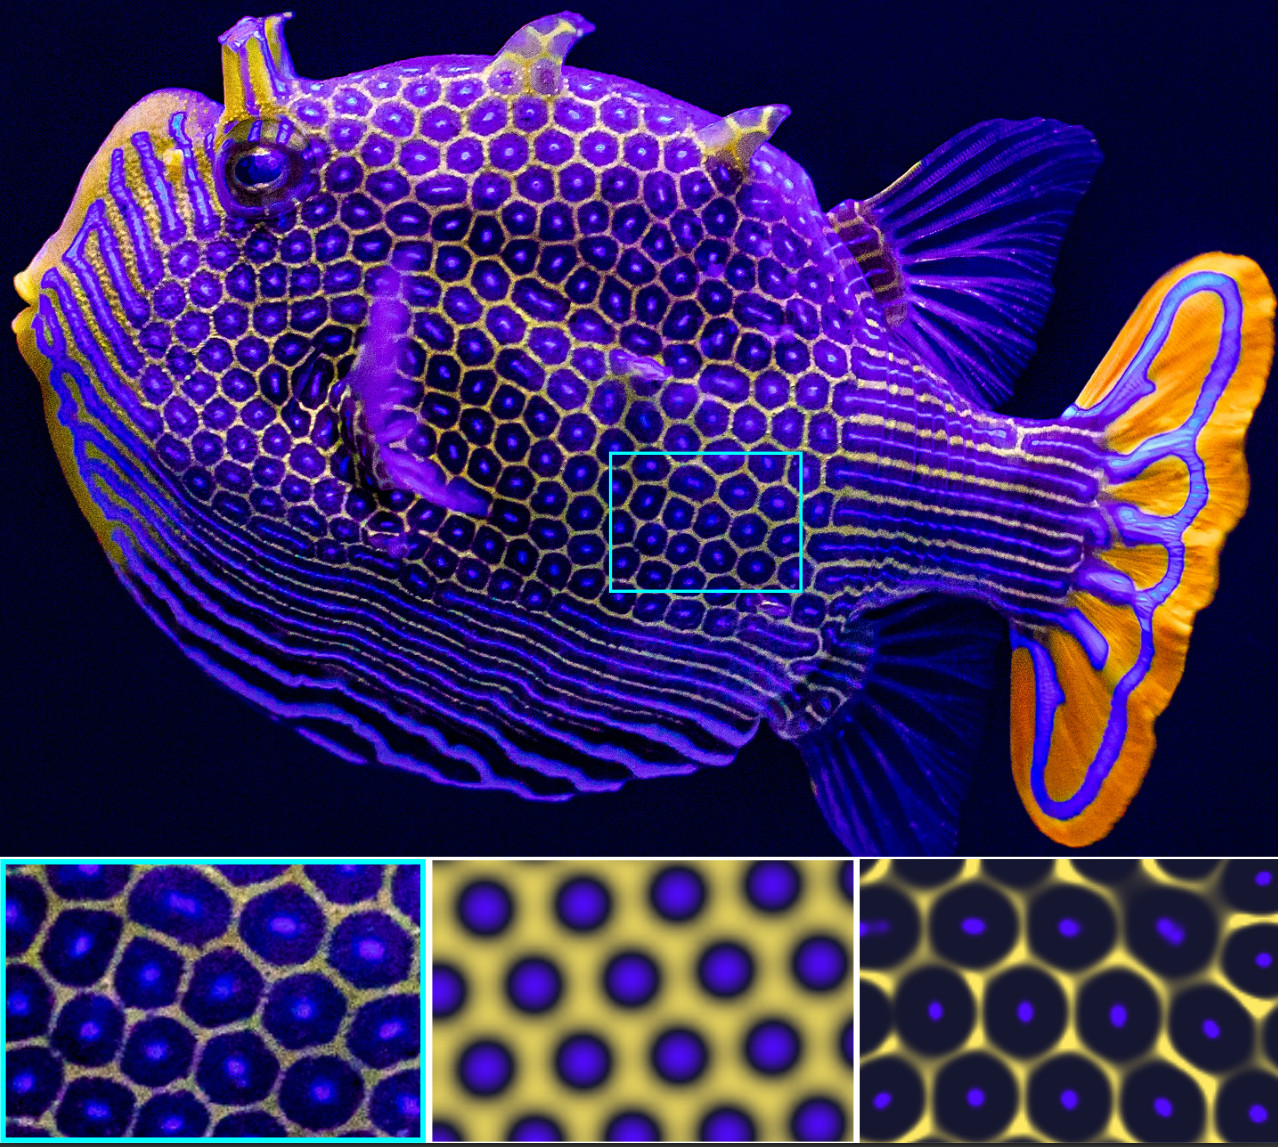 Diffusiophoresis-enhanced reaction-diffusion equations (bottom right) can explain how the Ornate Boxfish gets its spots (bottom left). See How animals get their stripes and spots and Ben Alessio’s sandbox.